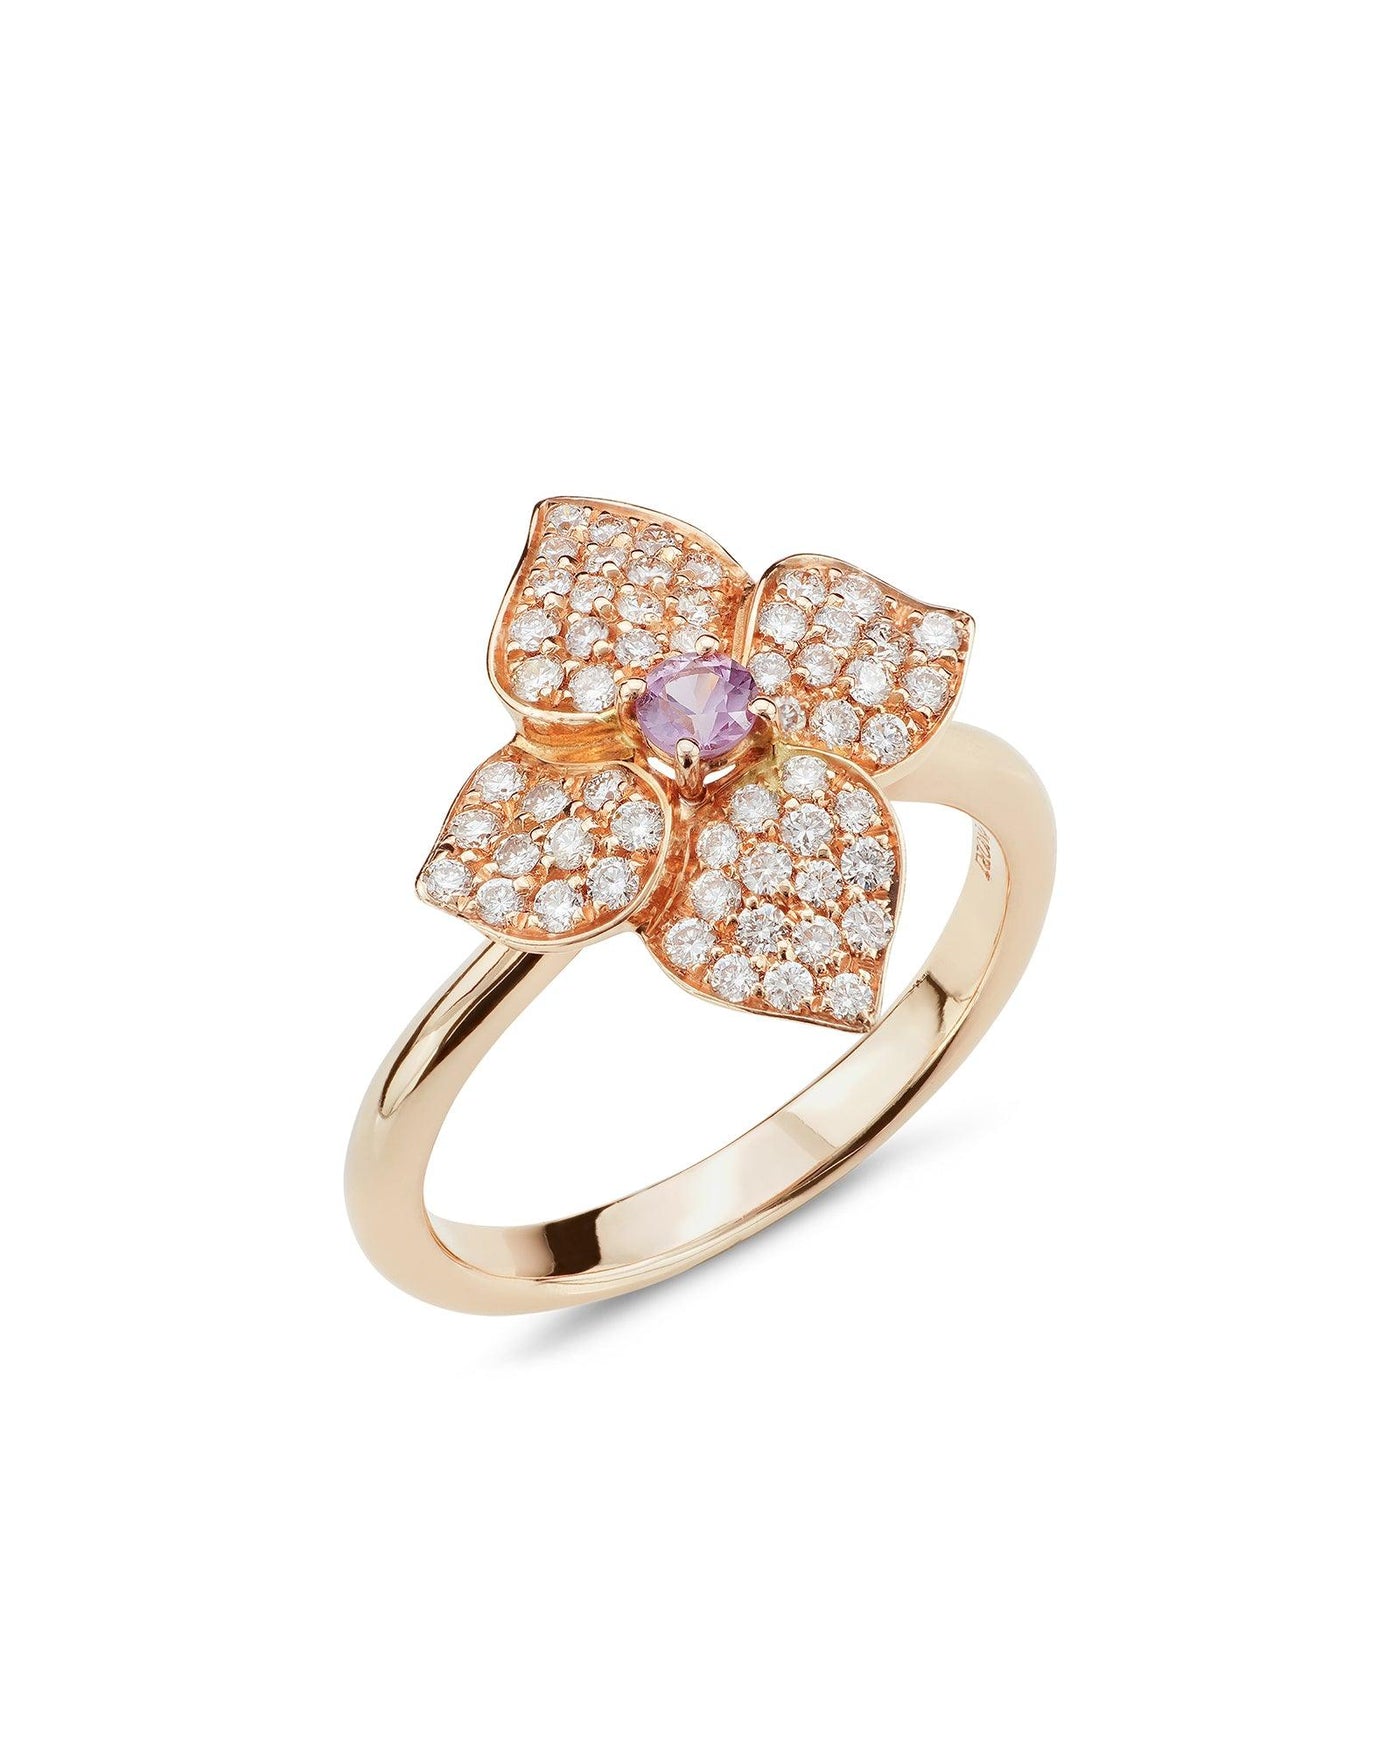 Ortensia Ring, Rose Gold, Diamonds And Pink Sapphire - Moregola Fine Jewelry